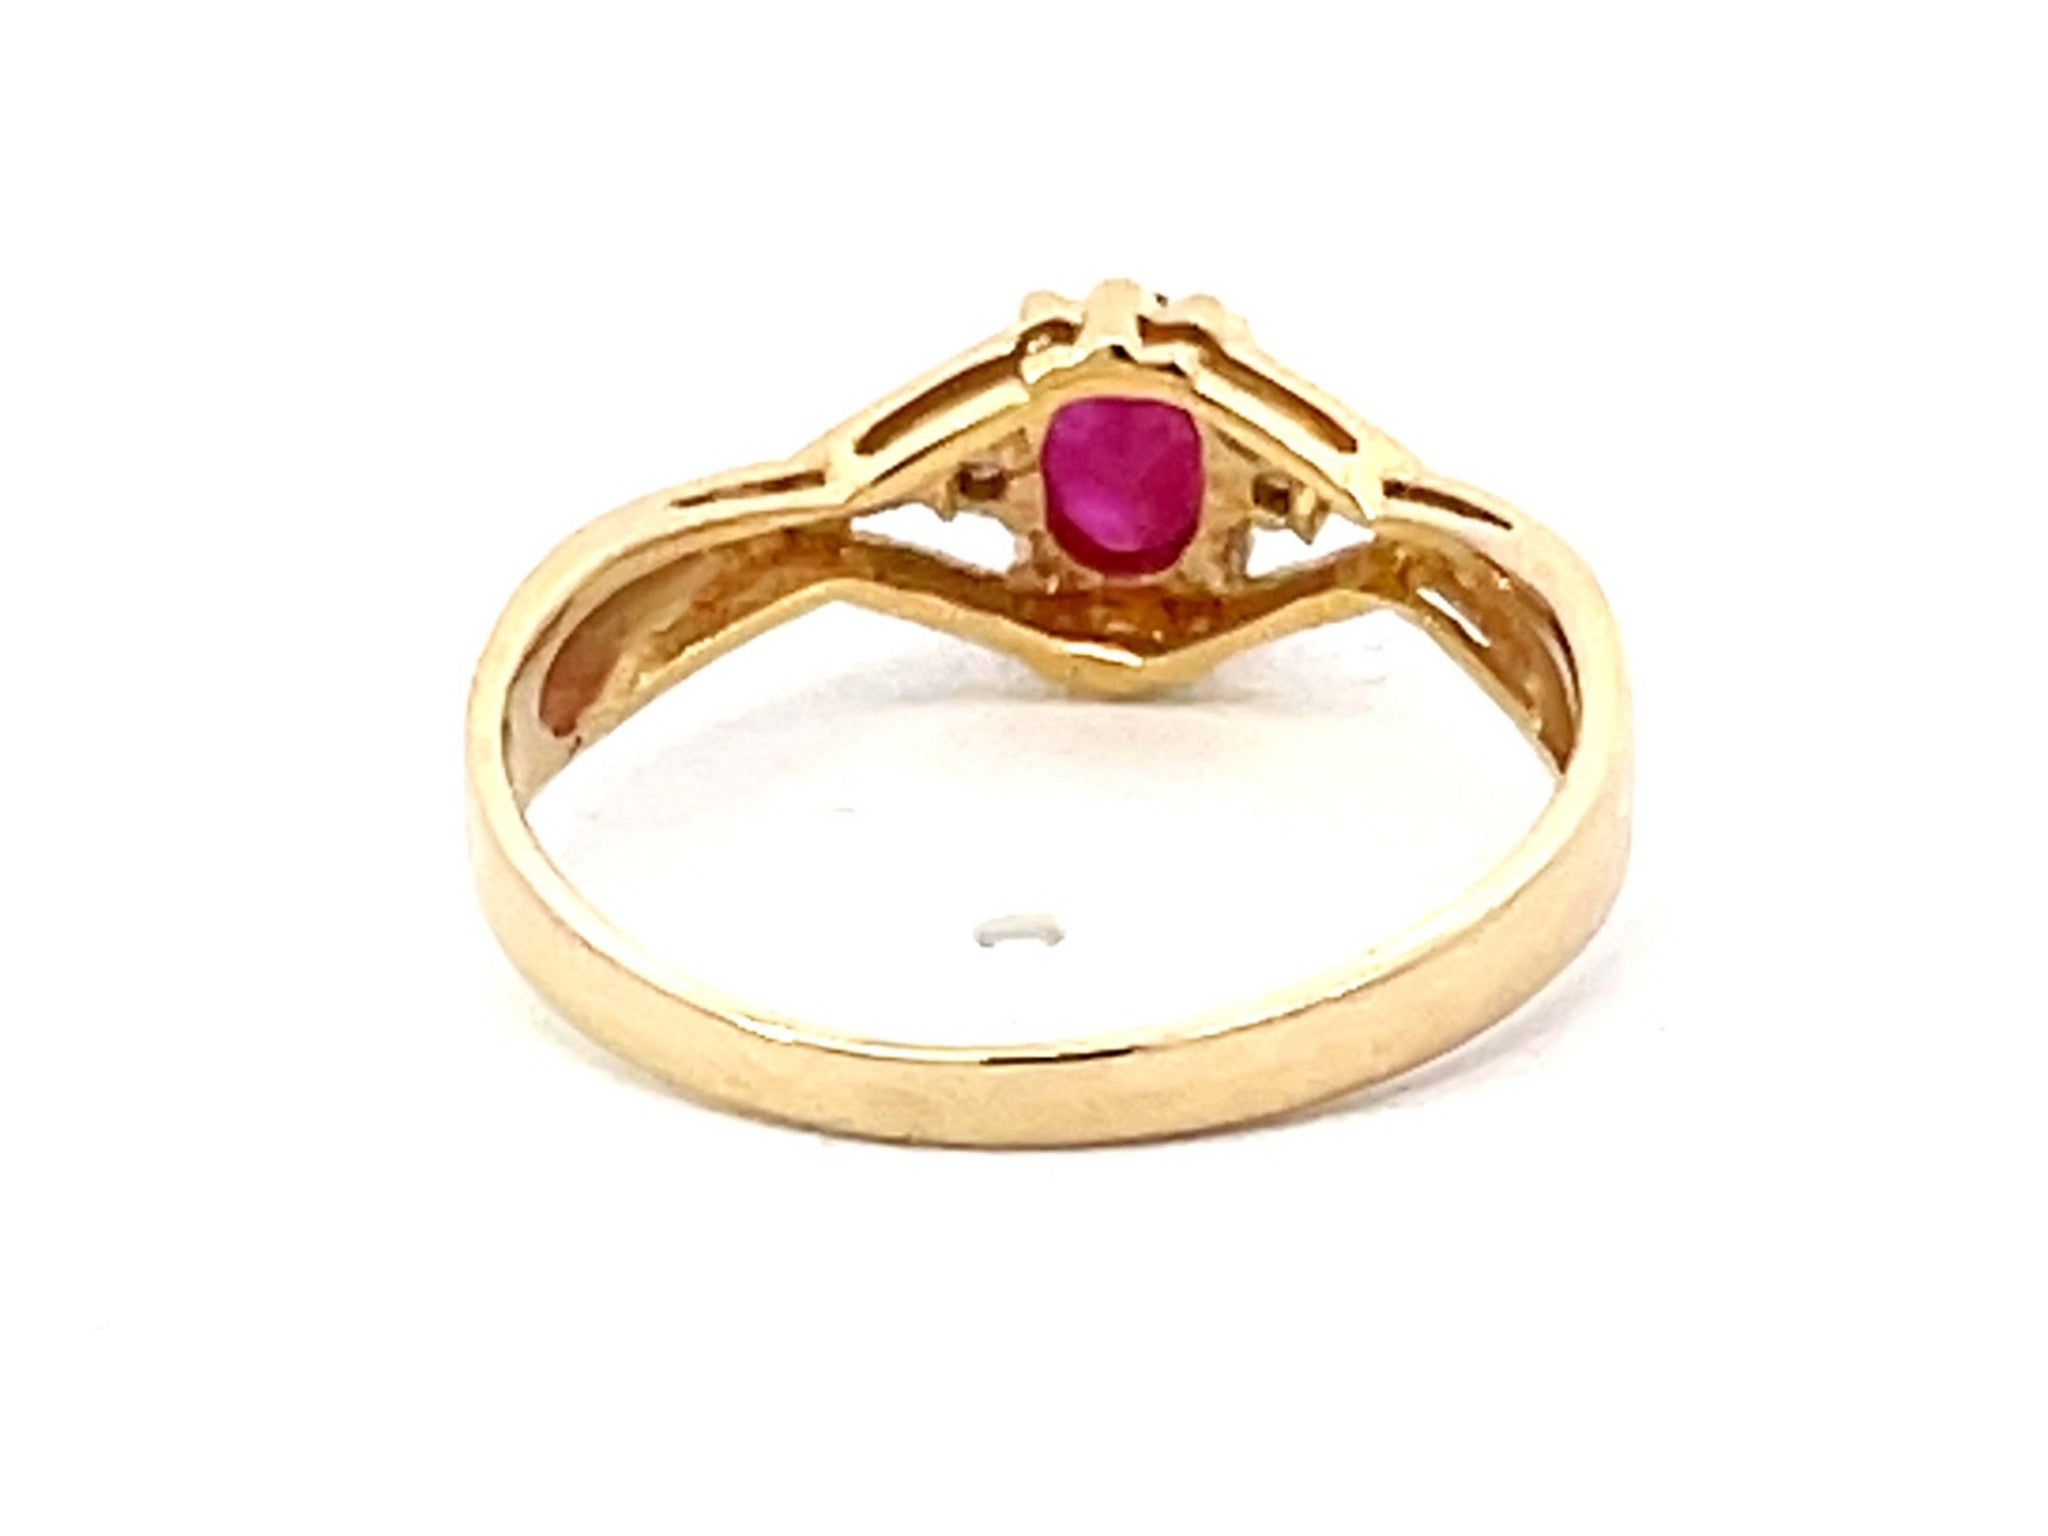 Oval Red Ruby Diamond Ring in 14k Yellow Gold